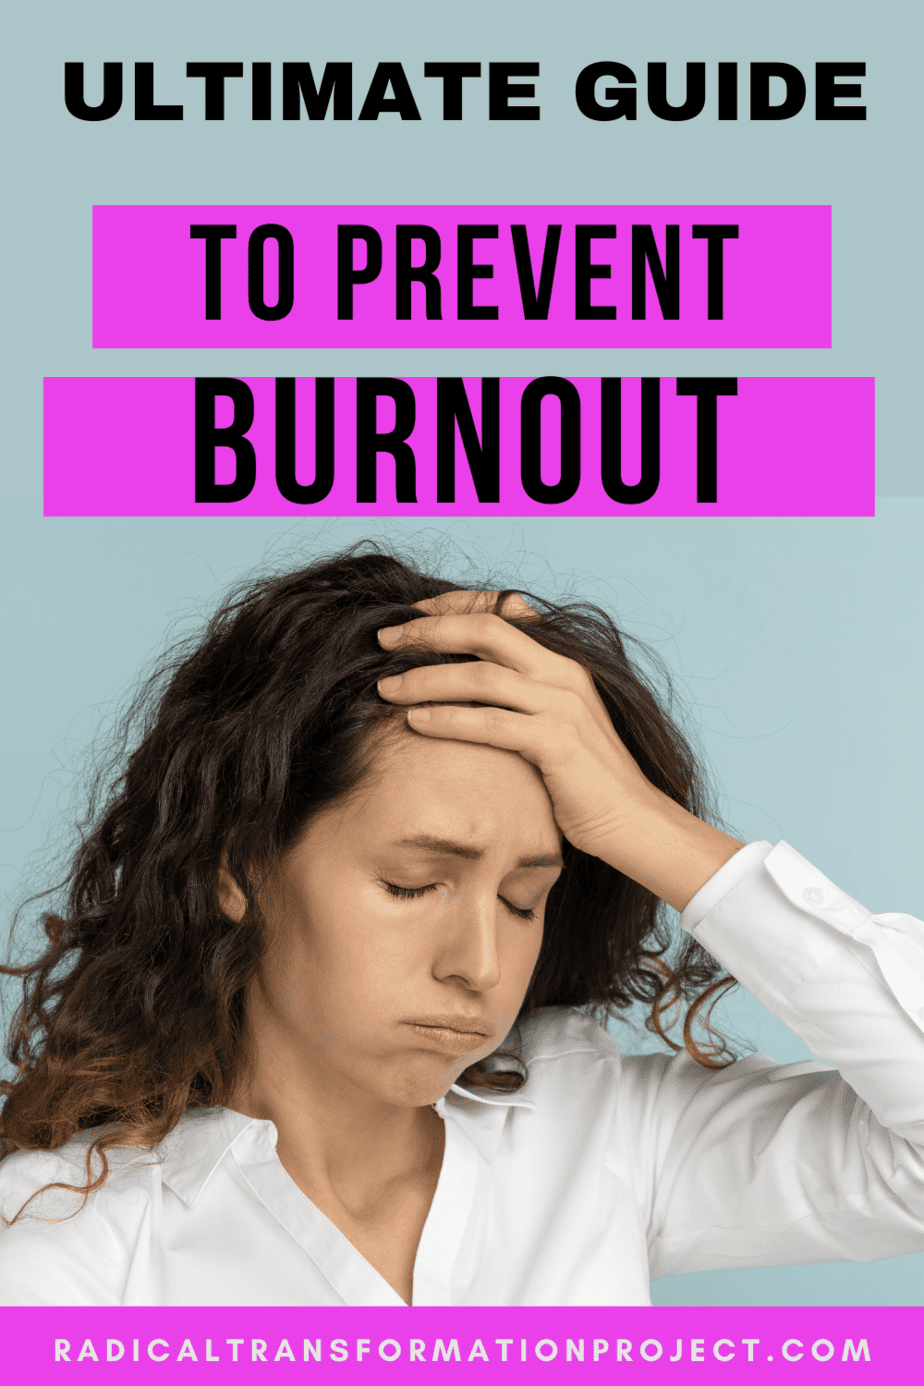 Ultimate Guide to Prevent Burnout